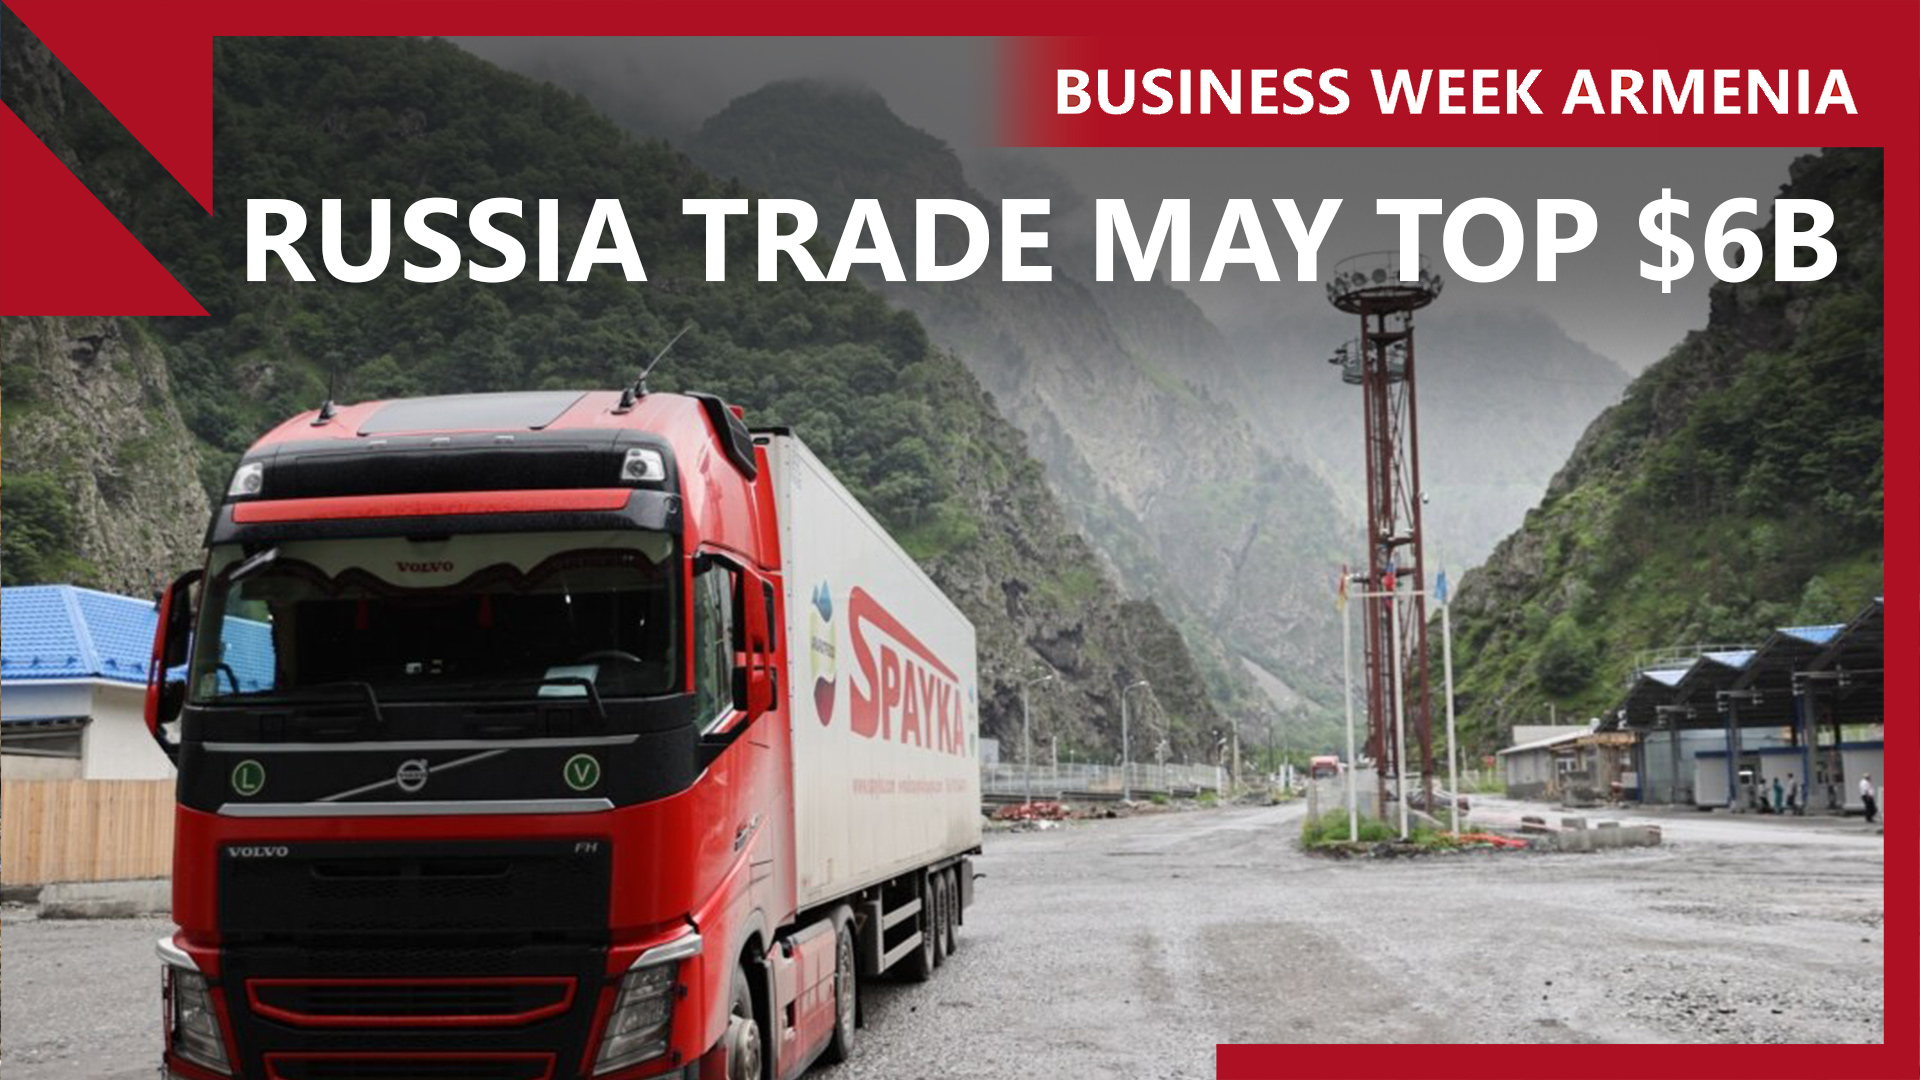 Armenia’s trade with Russia continues to soar: THIS WEEK IN BUSINESS